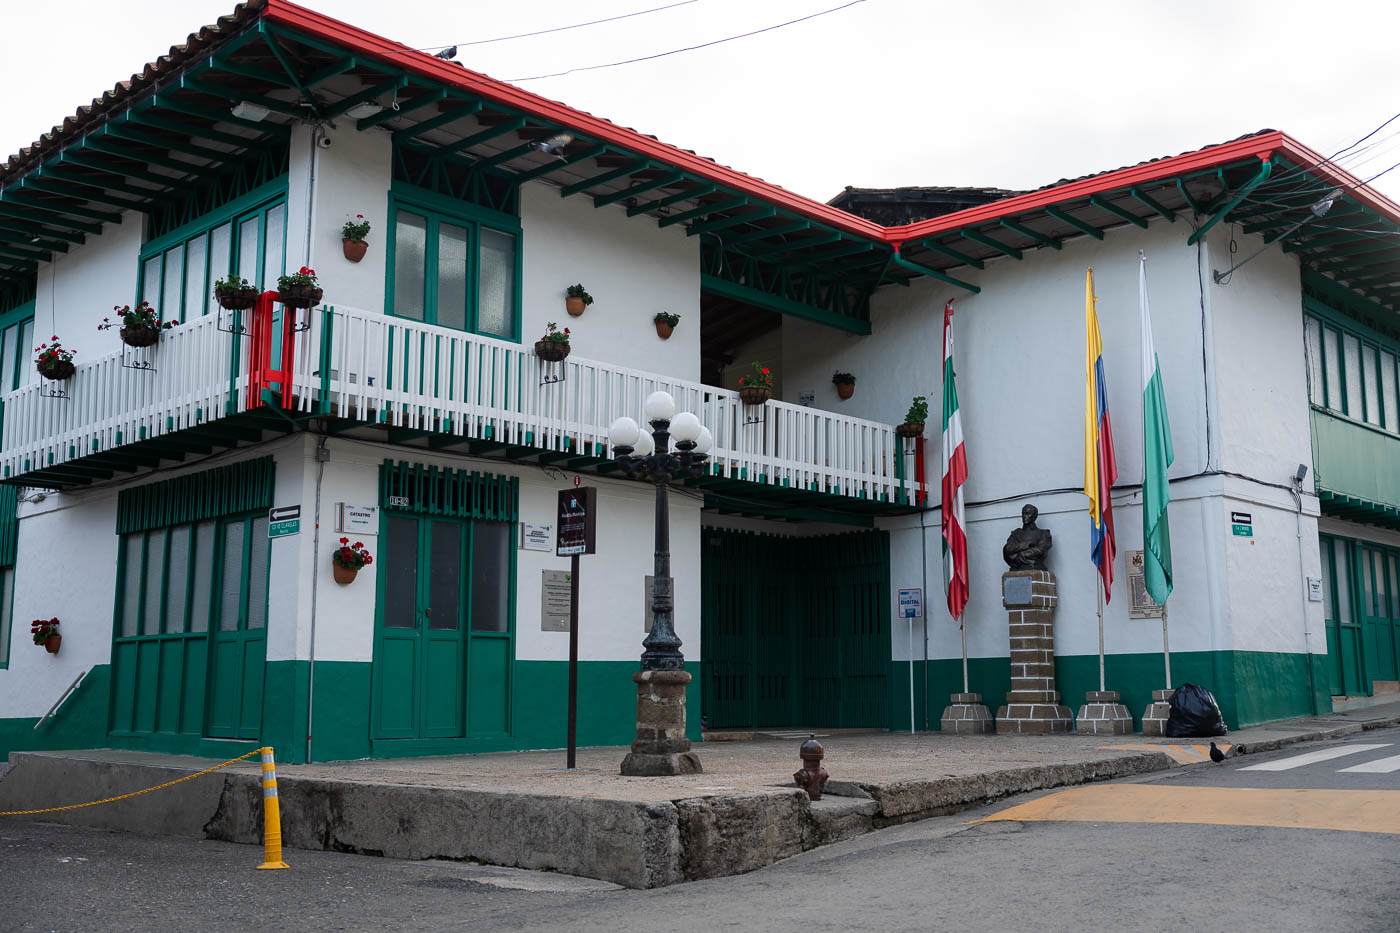 An exterior view of the colonial looking Jardin town hall.